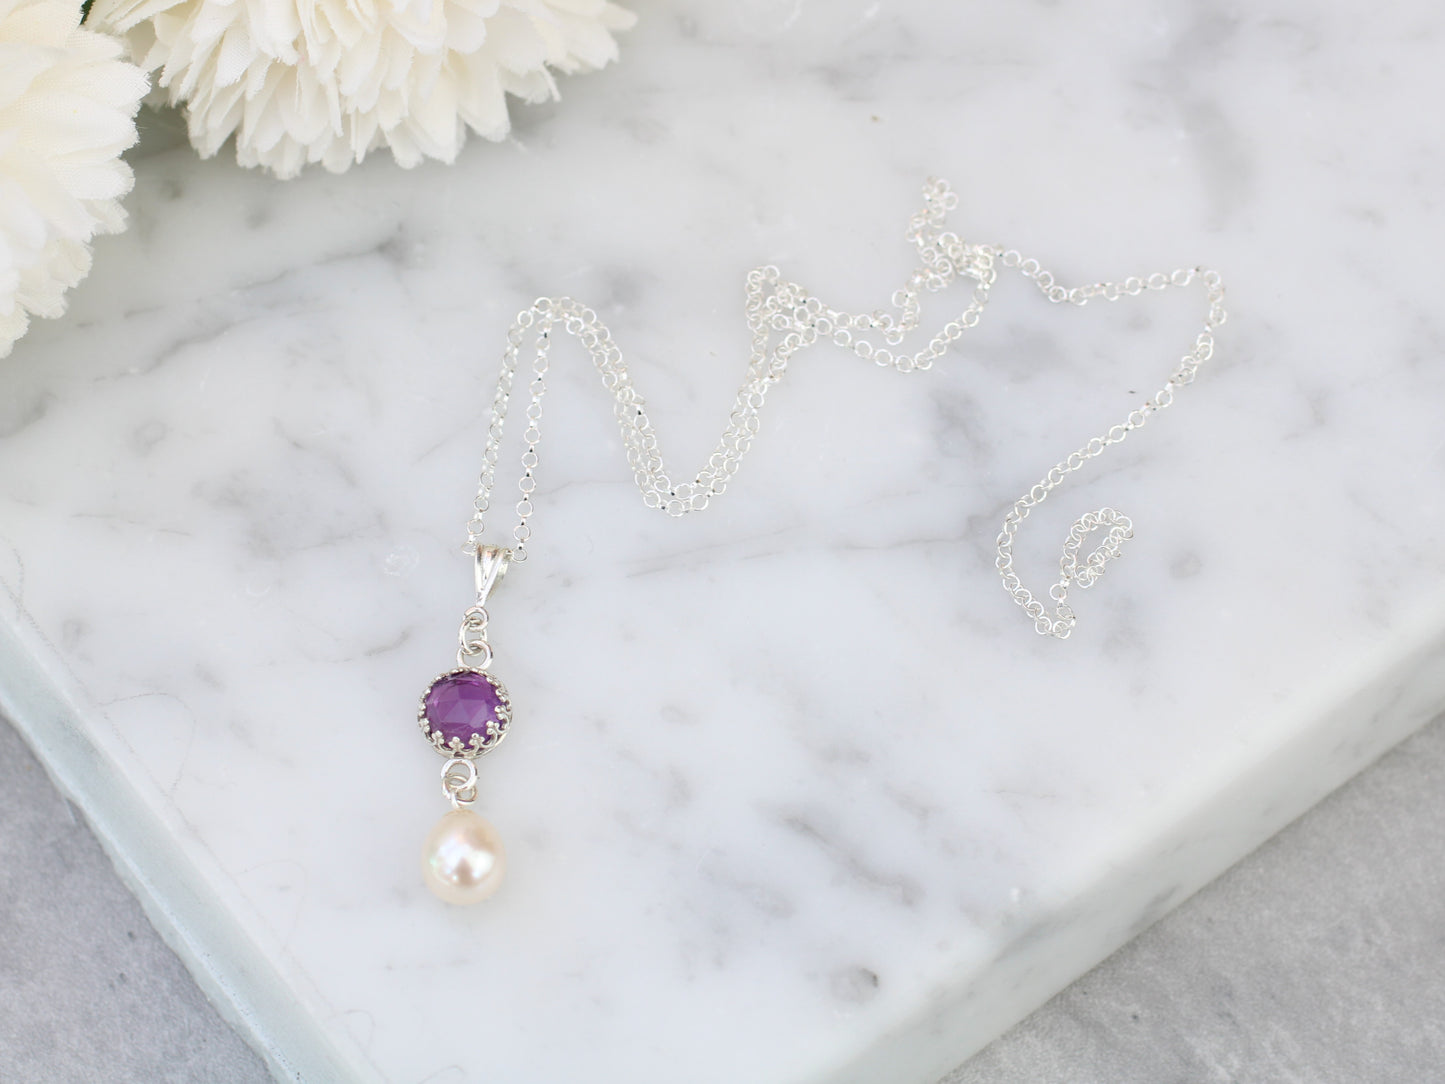 Amethyst and pearl necklace. Ready to ship.